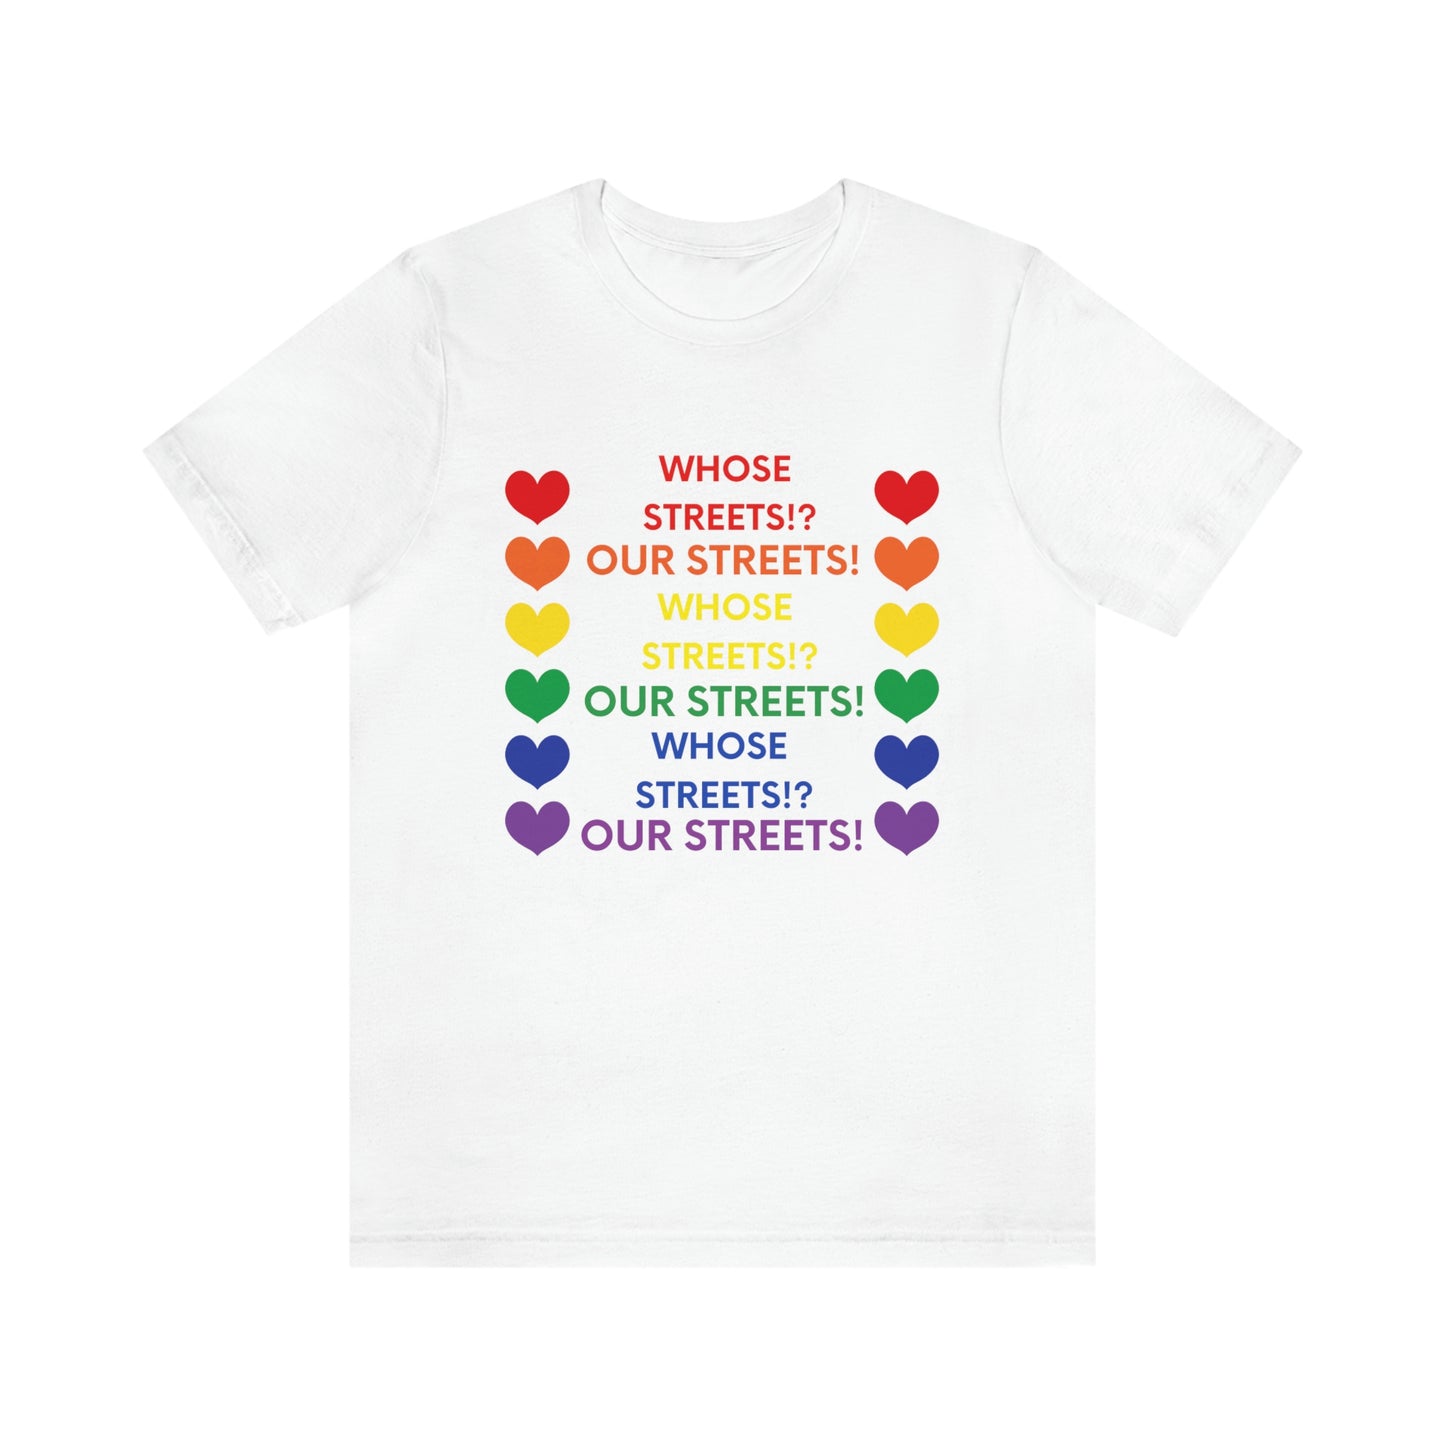 WHOSE STREETS? OUR STREETS! Unisex Jersey Short Sleeve Black Tee (SirTalksALot Exclusive)